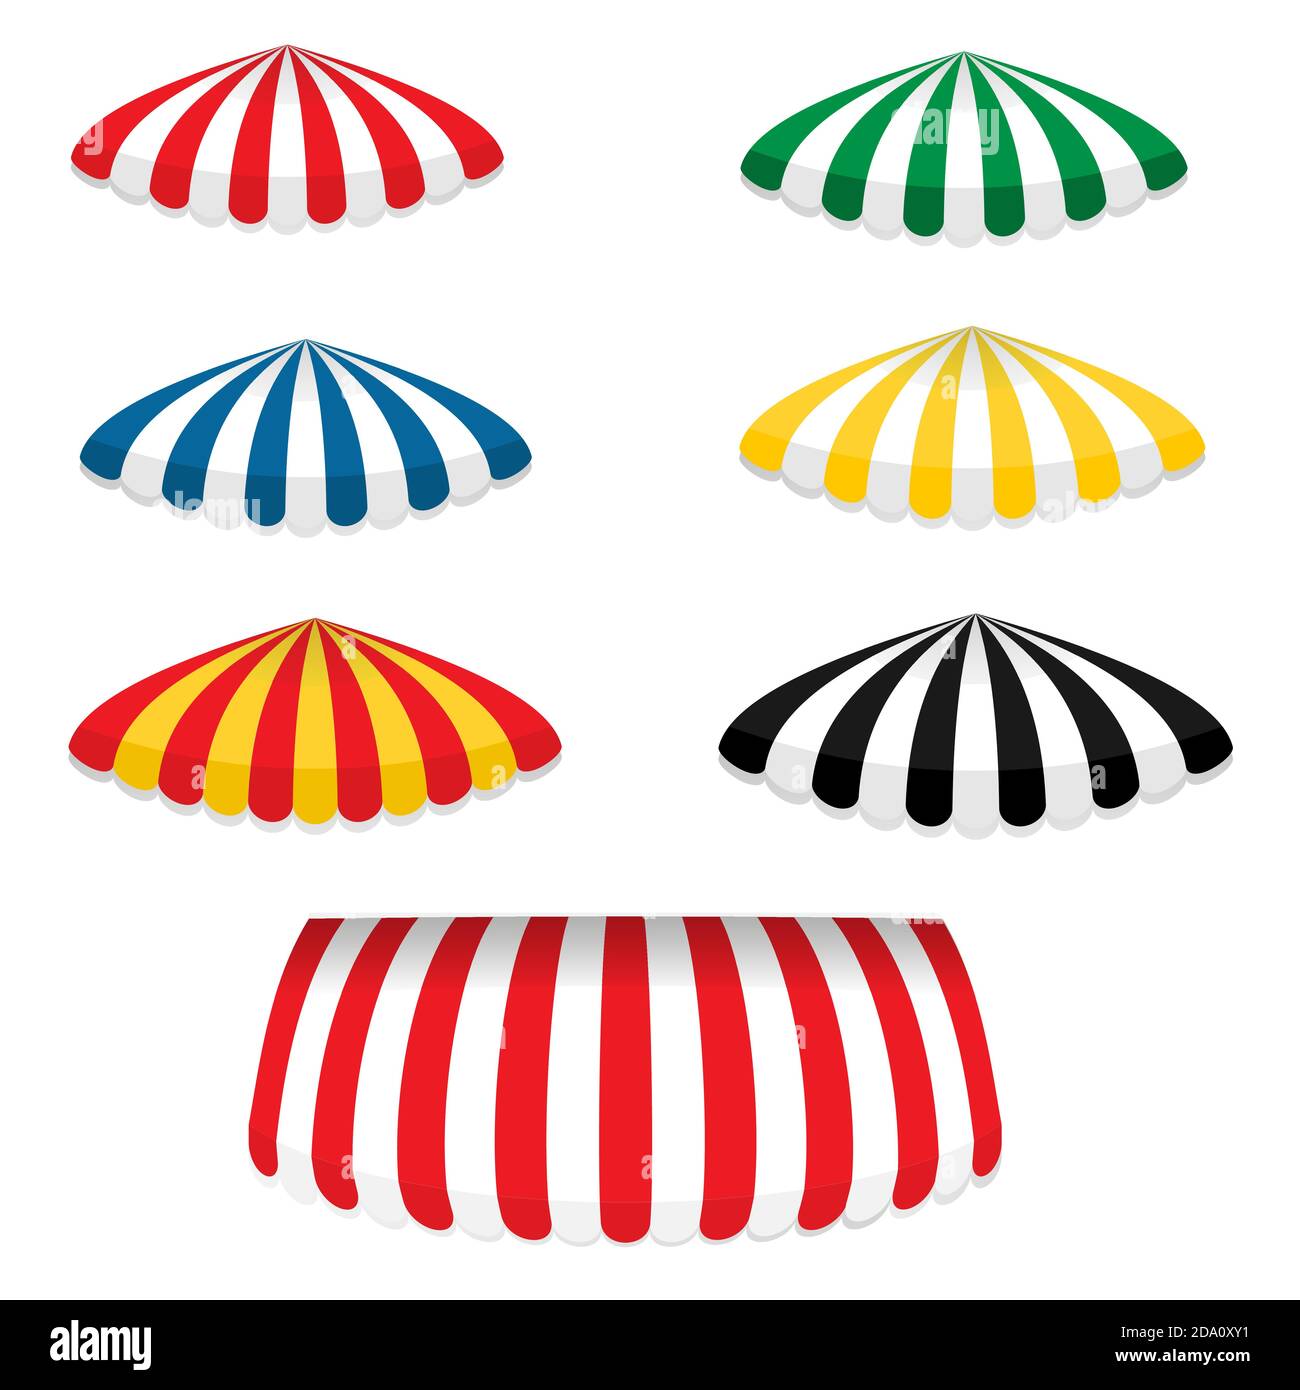 Striped colorful awnings set round shape for shops, cafes and street restaurants, isolated on white background.Vector cartoon illustration. Stock Vector